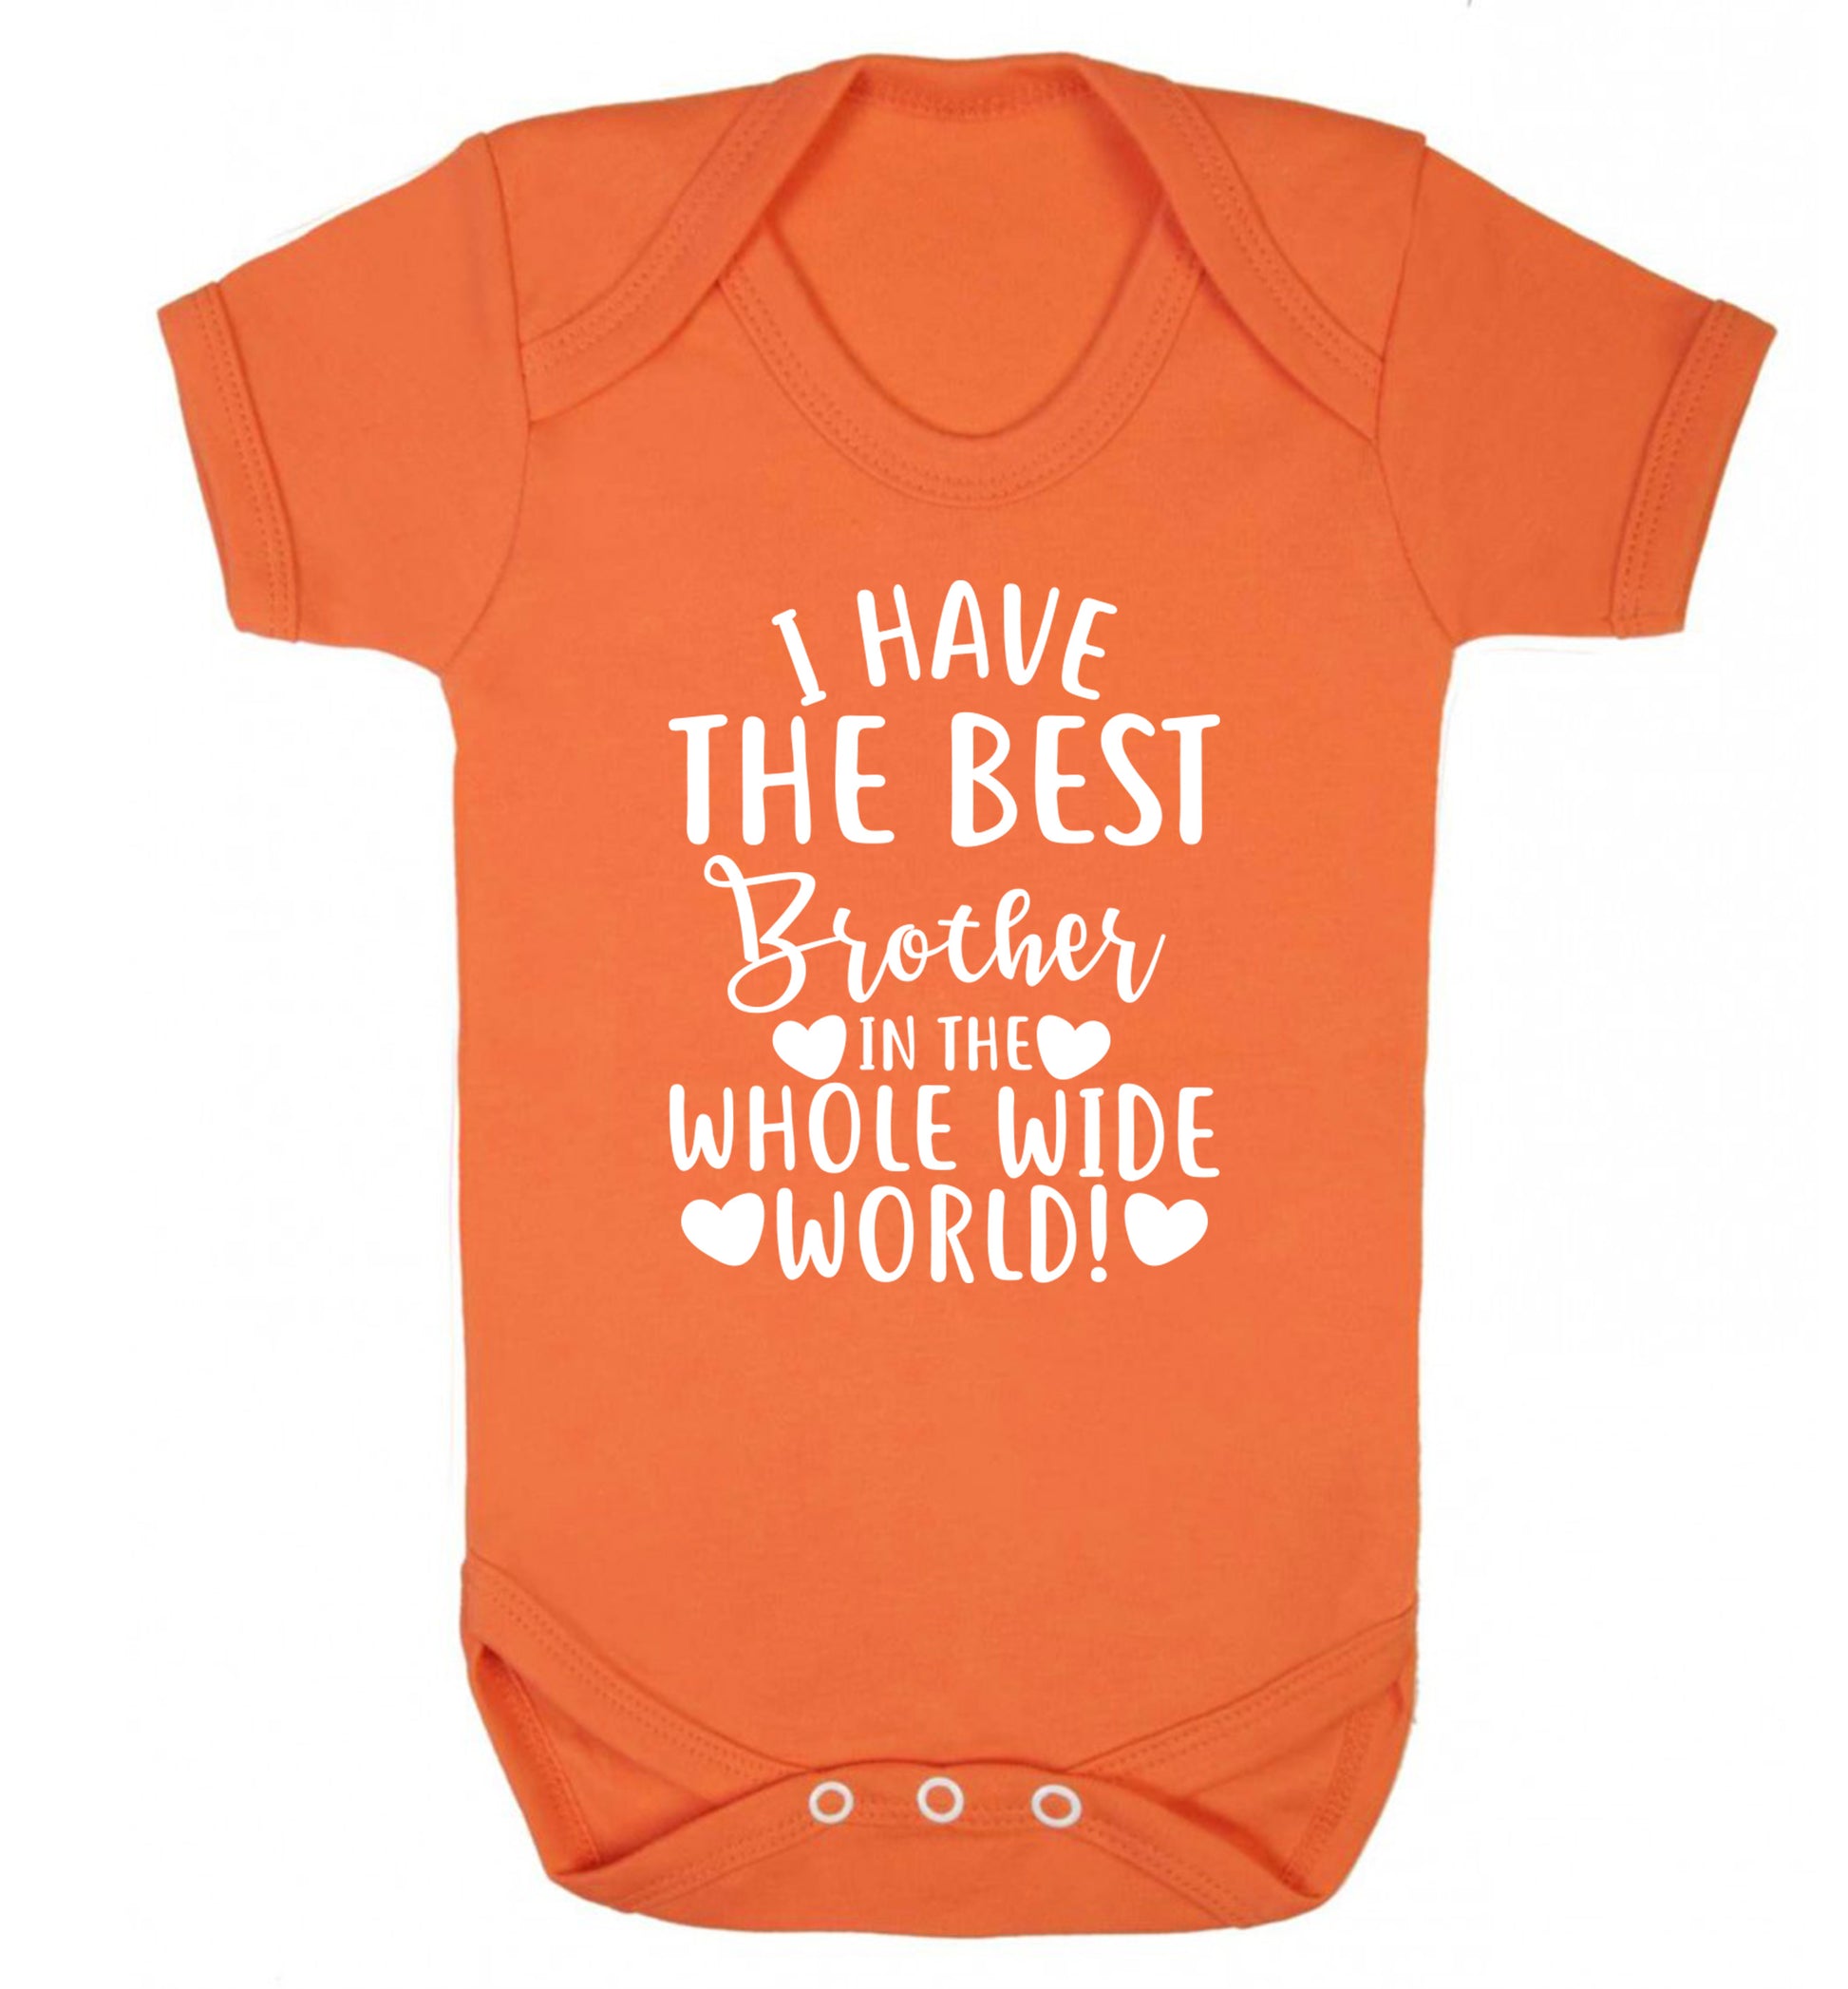 I have the best brother in the whole wide world! Baby Vest orange 18-24 months